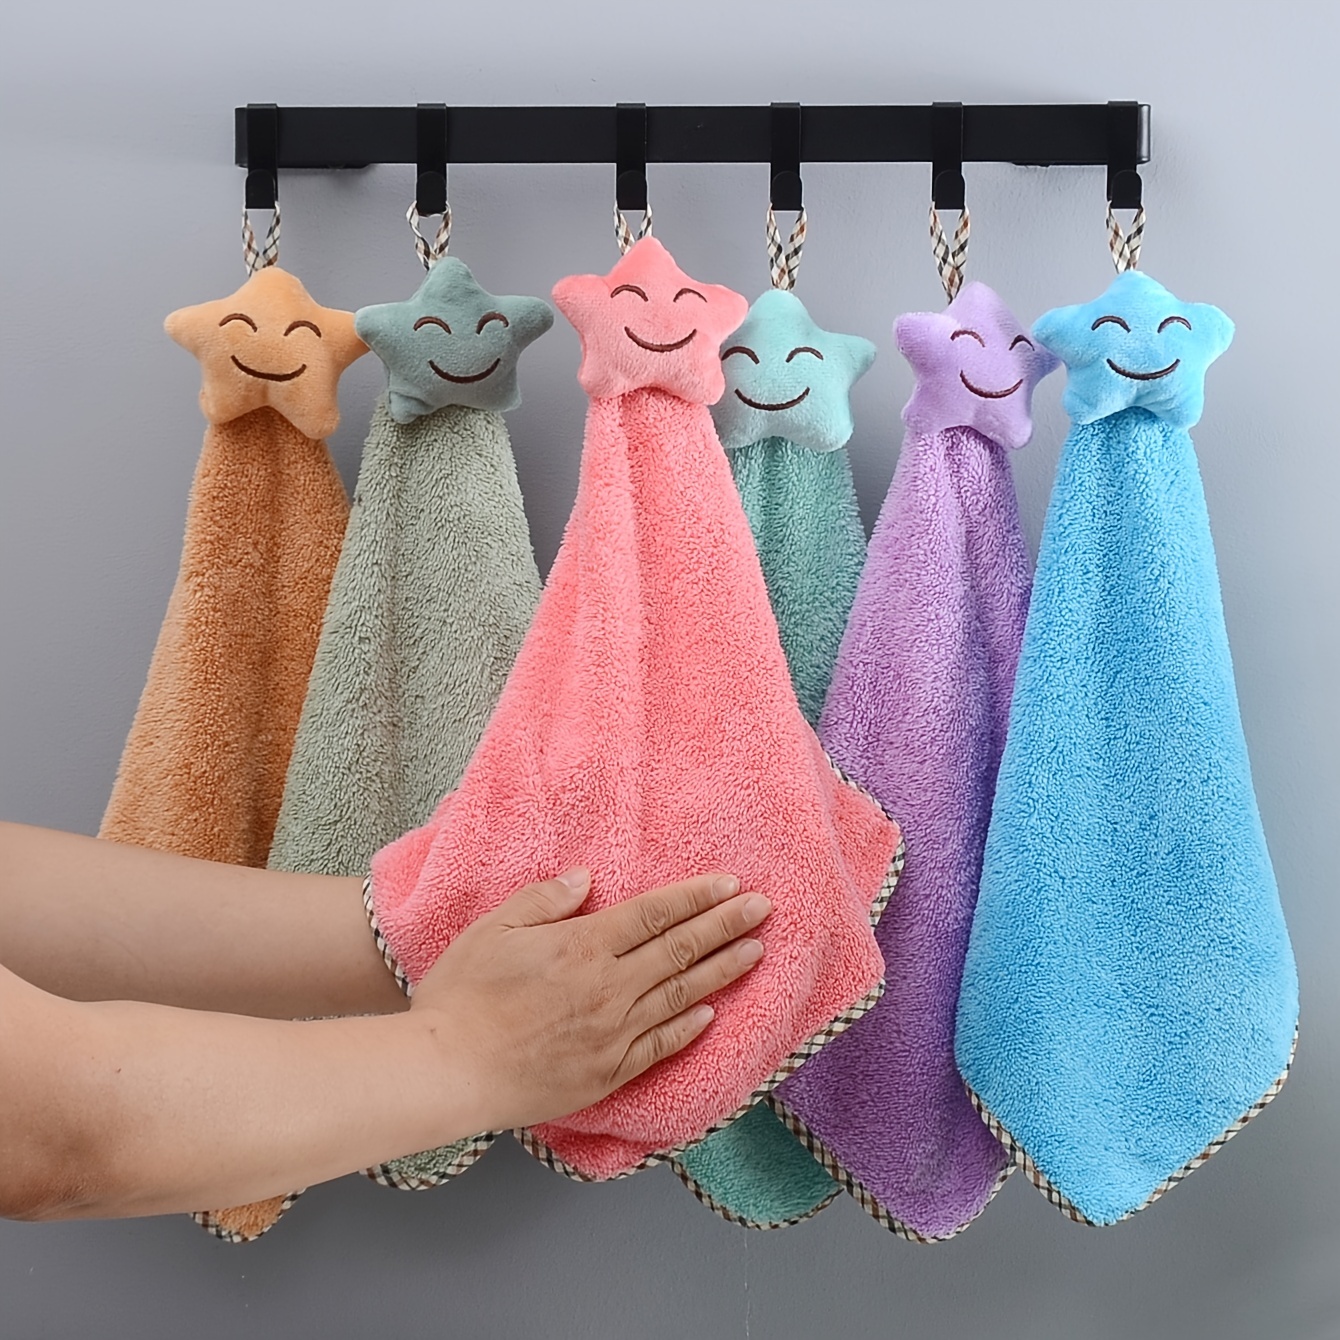 1Pcs Soft Absorbent Towels Kitchen Bathroom Hanging Wipe Hand Towels Baby